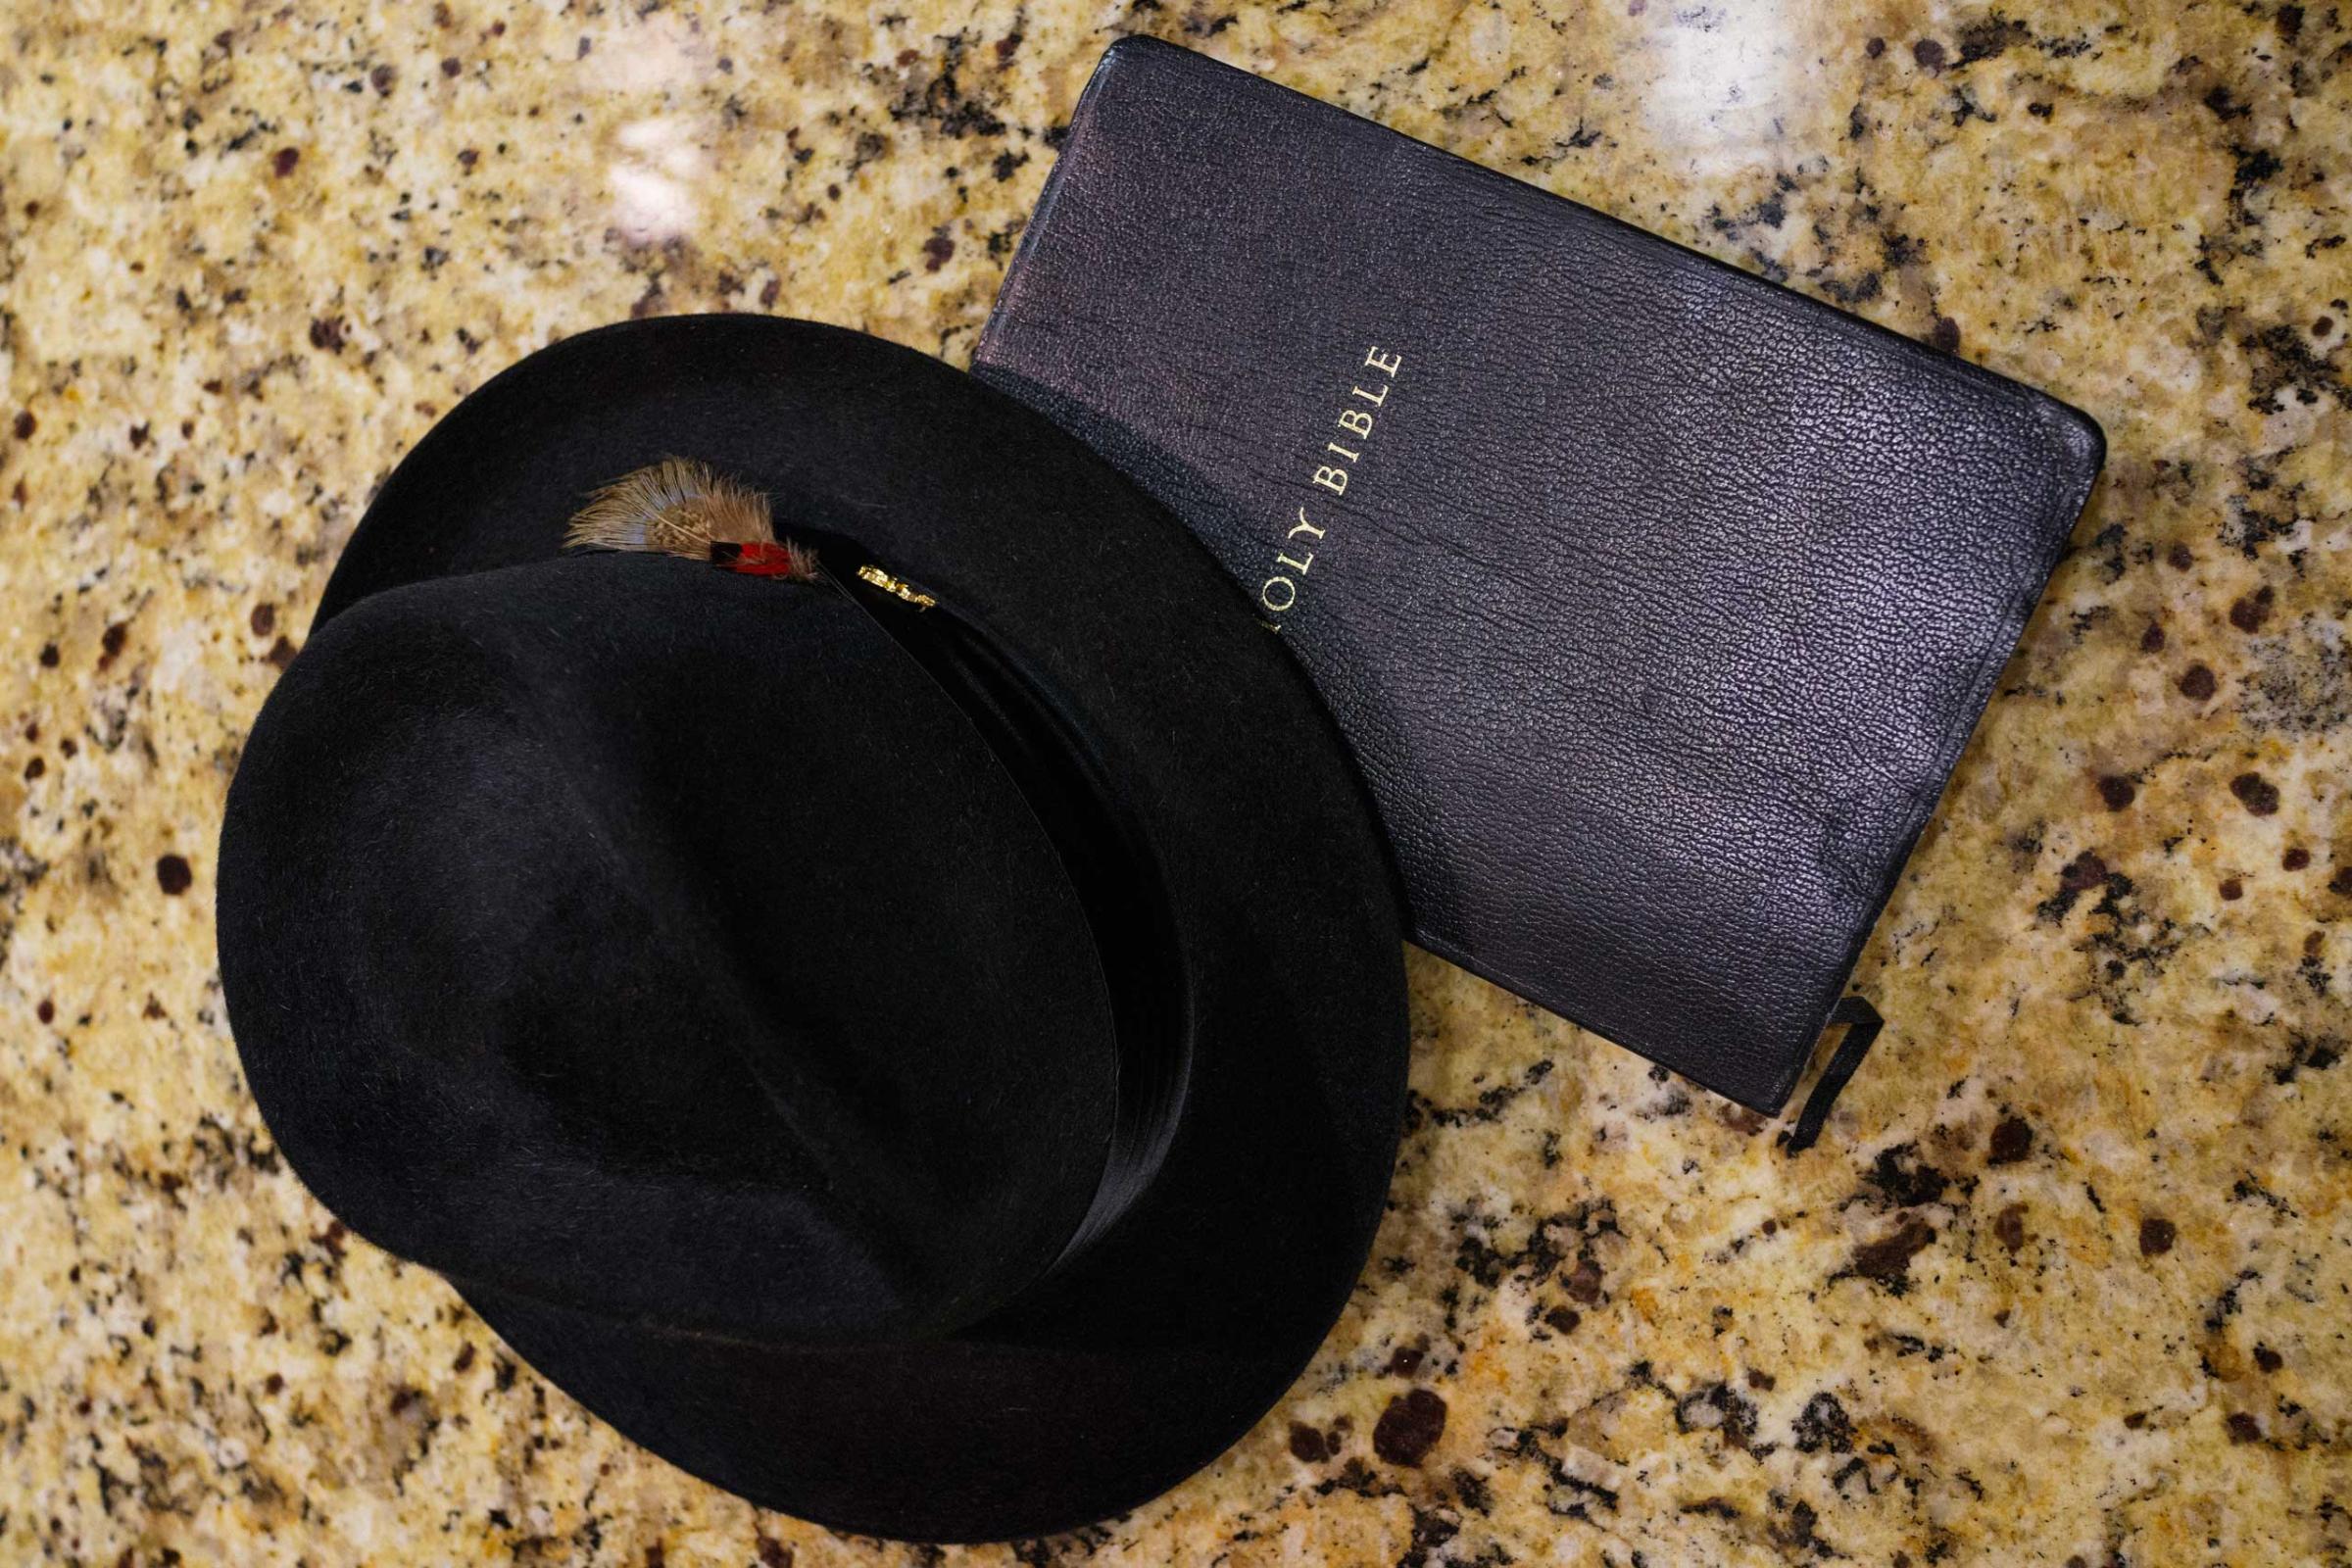 Pete Garrett's hat and bible rest on the kitchen counter prior to church service, at his home in Trussvile, Ala. on March 22, 2015.